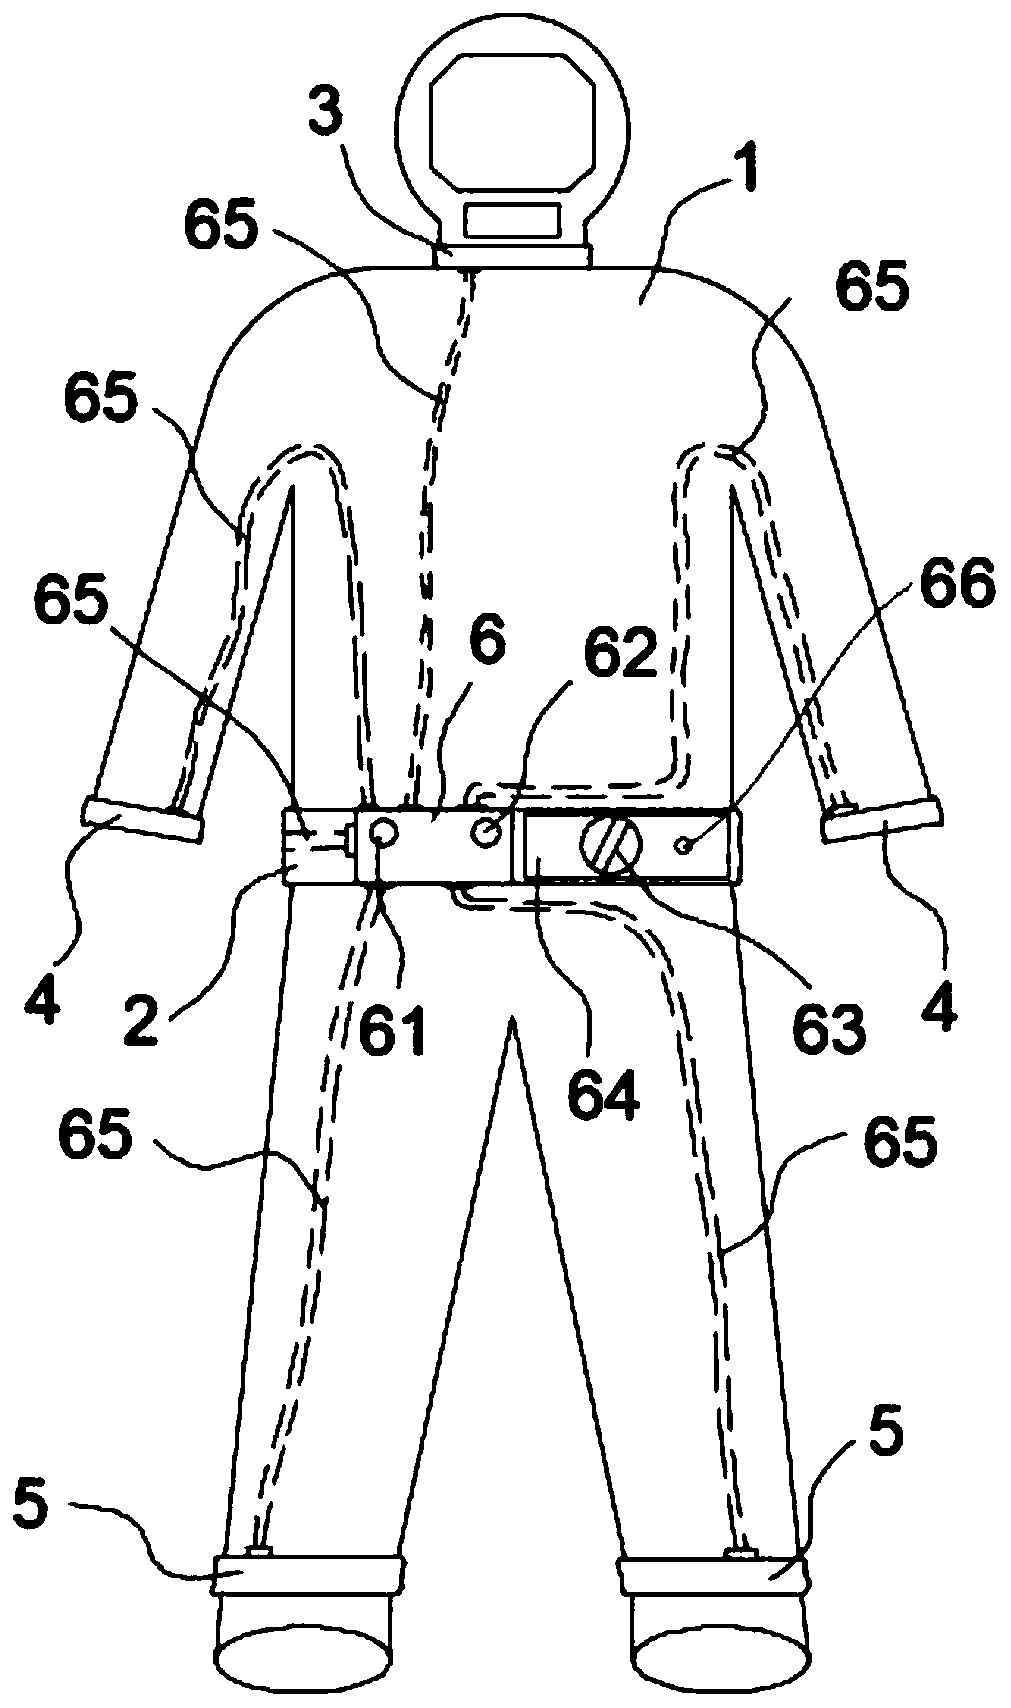 Easy-to-wear radiation protective medical isolation garment